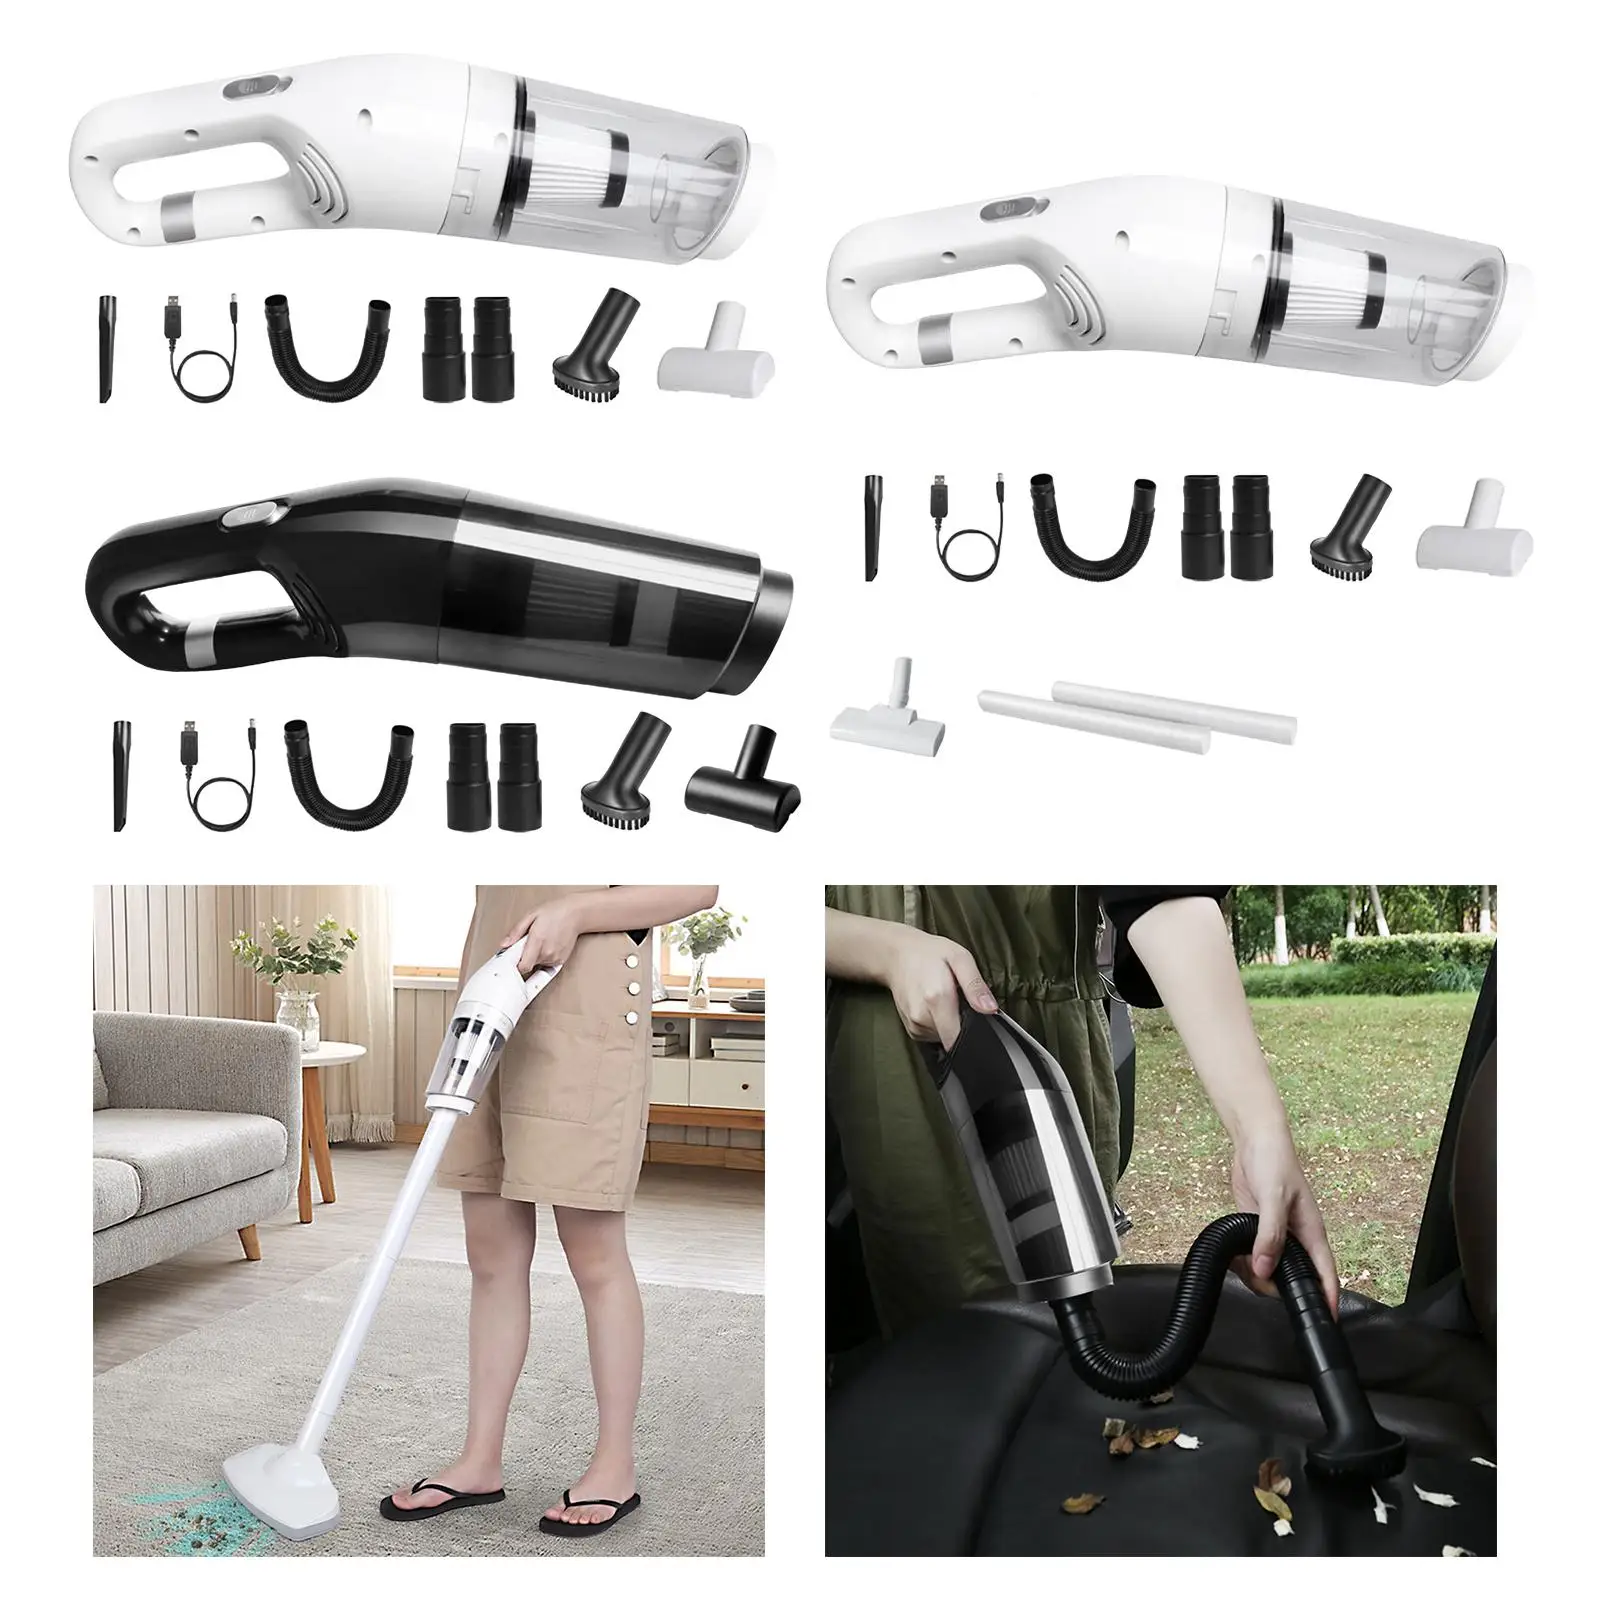 Cordless Car Vacuum Cleaner with Large Dust Cup for Household Keyboard Sofa